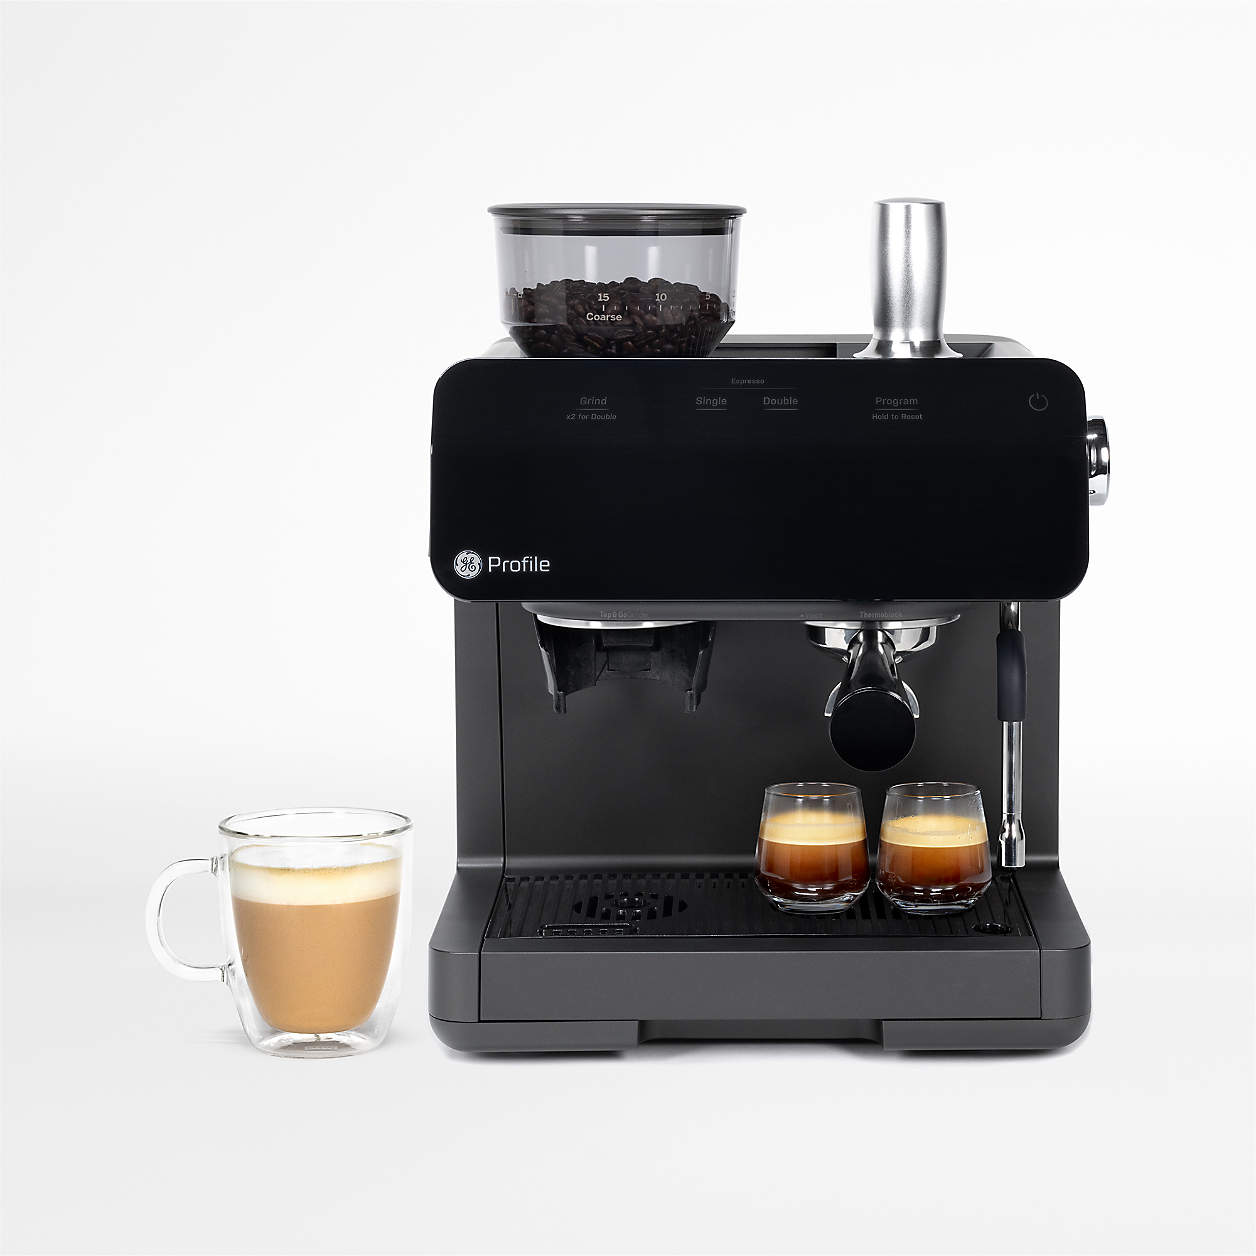 GE Profile Black Semi Automatic Espresso Machine With Grinder And Frother Reviews Crate Barrel